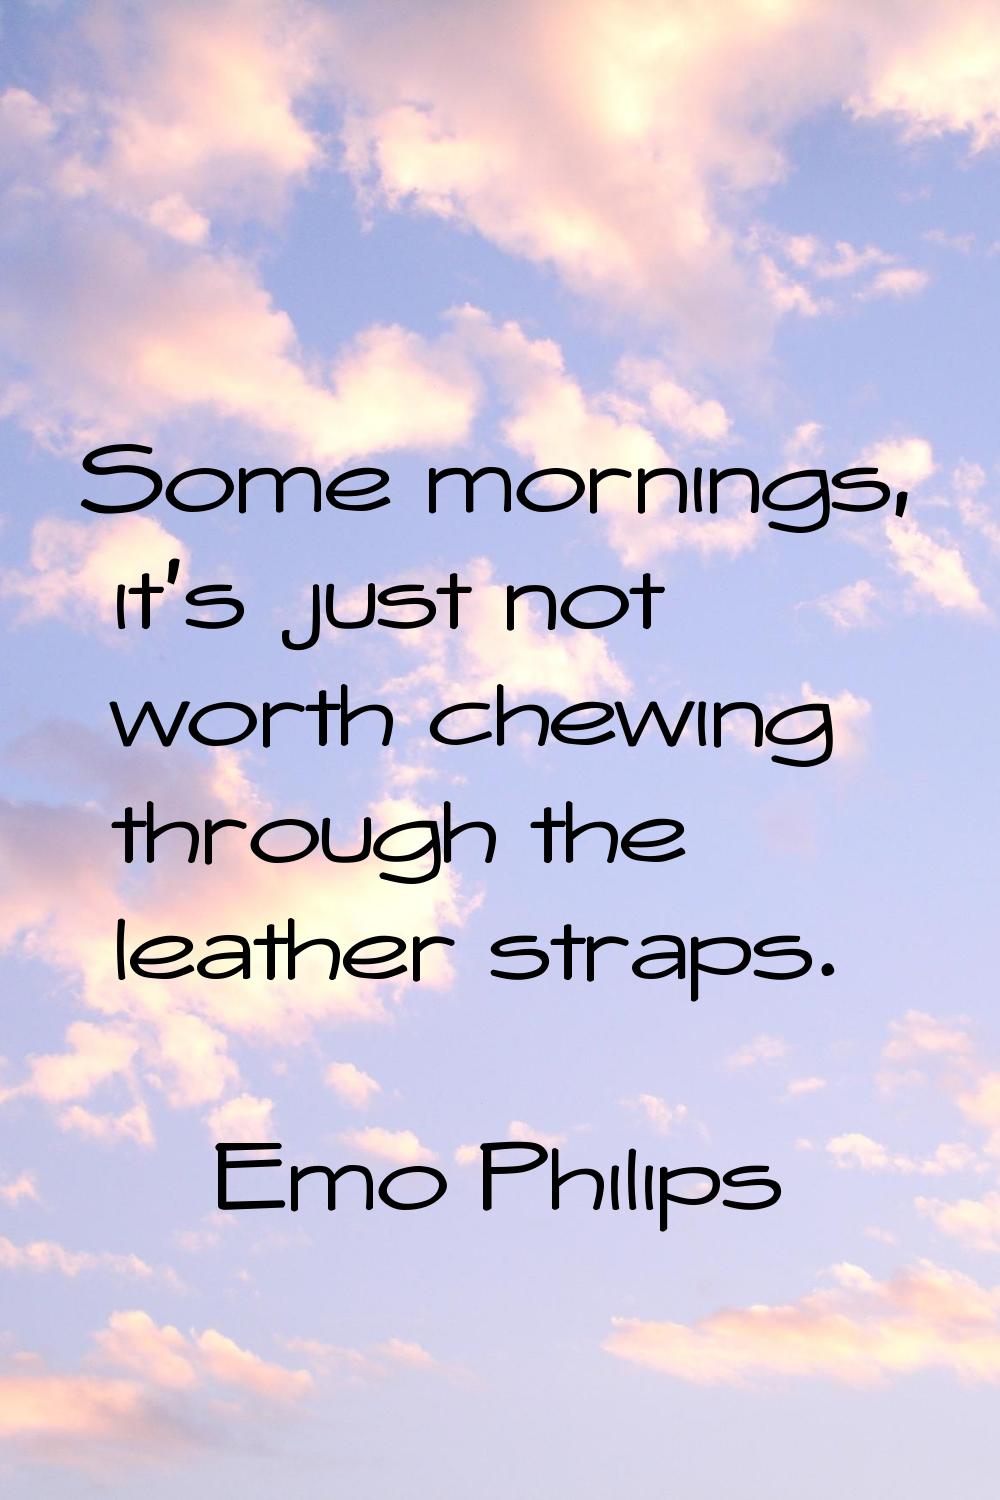 Some mornings, it's just not worth chewing through the leather straps.